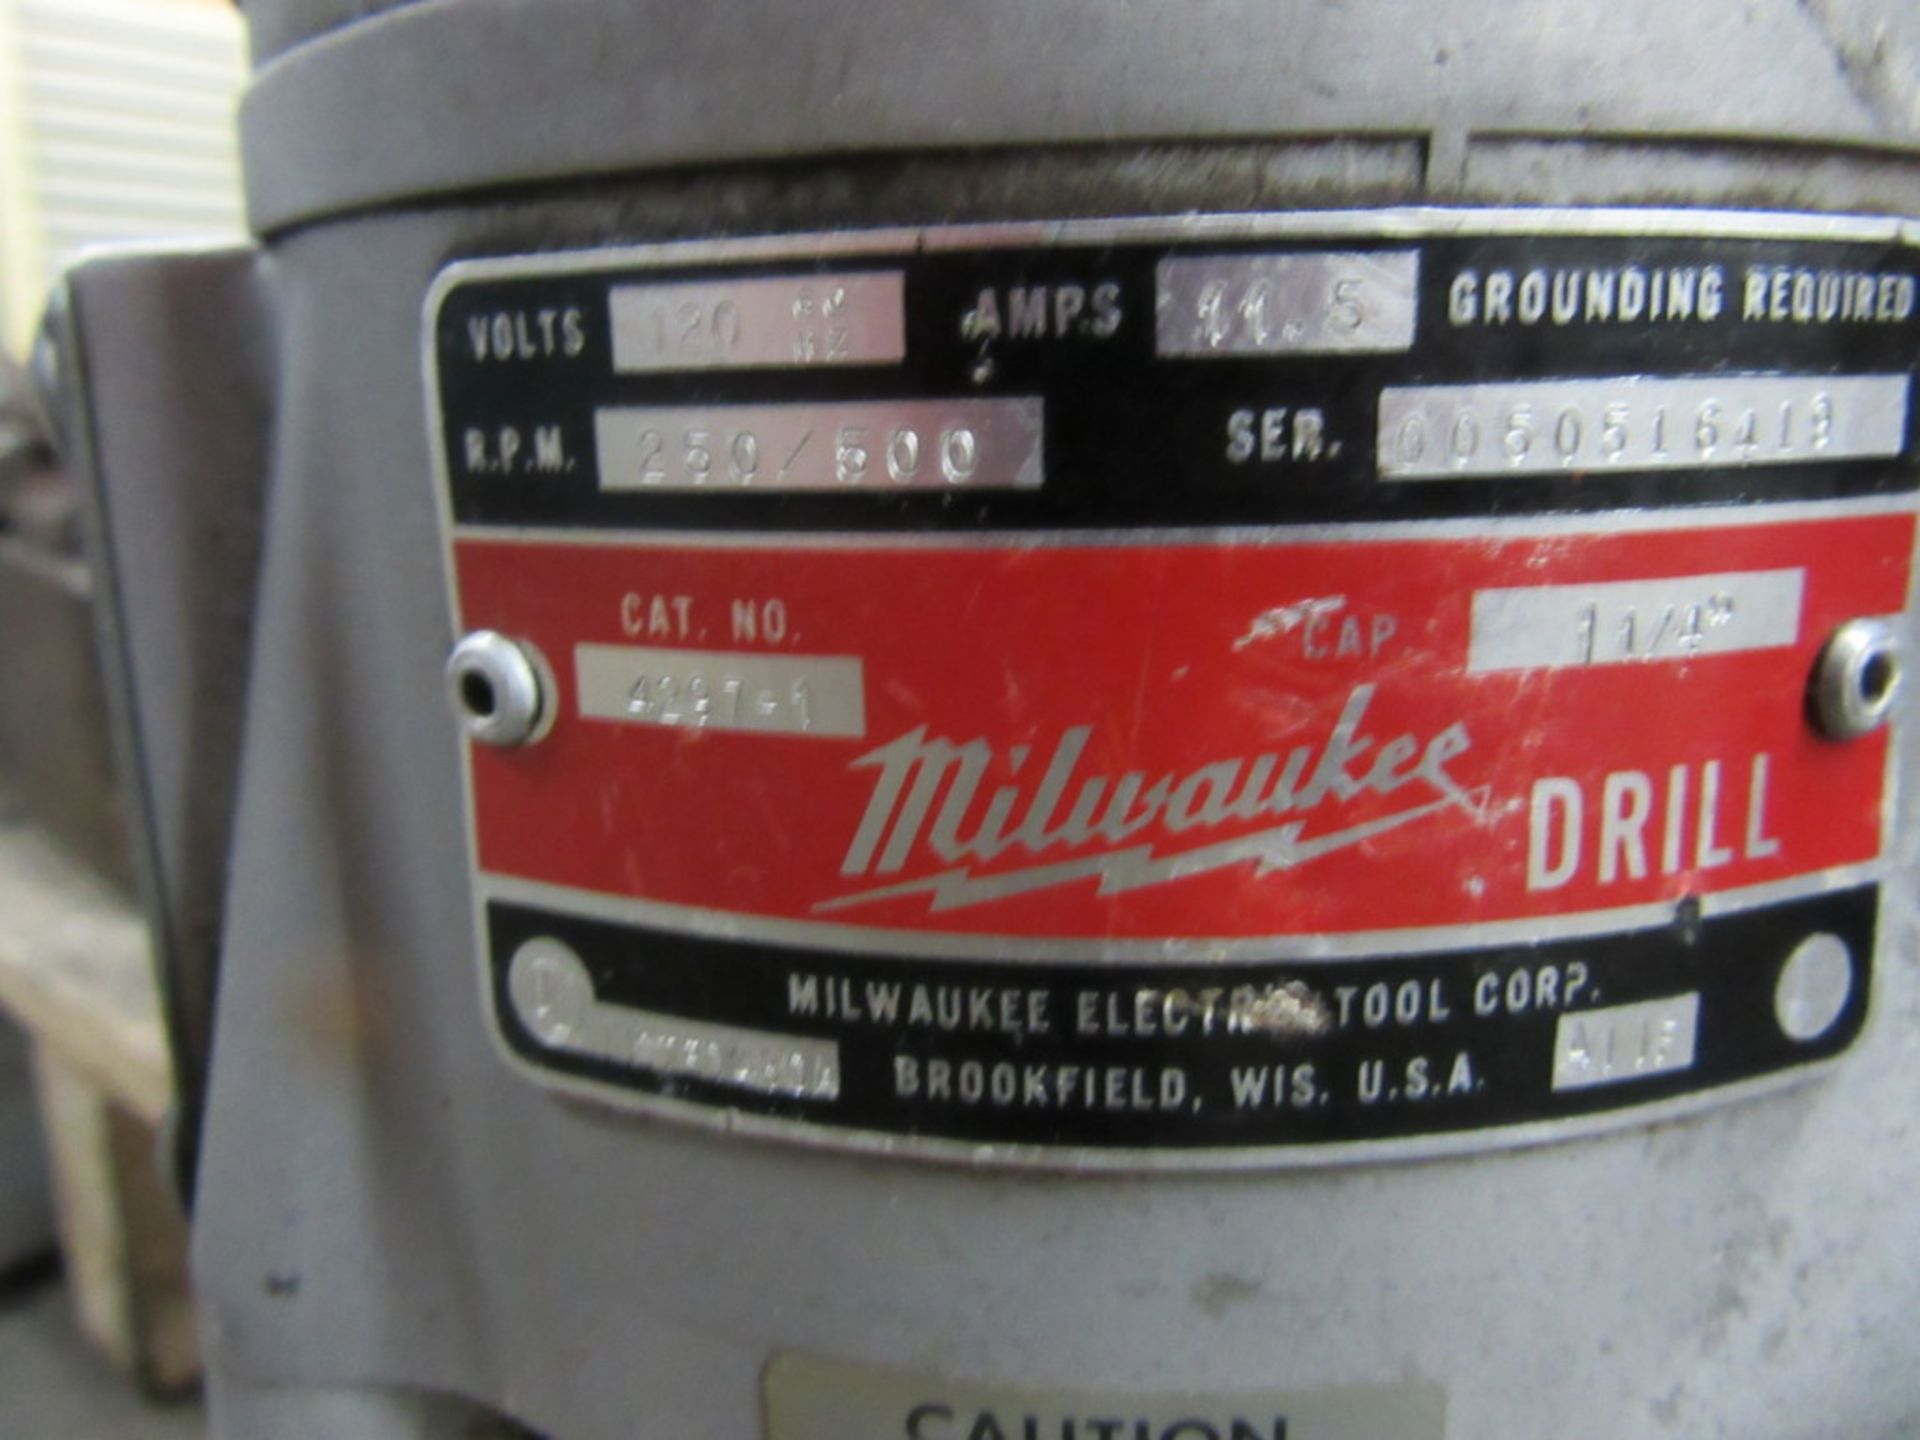 MILWAUKEE MDL. 4297-1/4220 MAGNETIC DRILL PRESS - Image 7 of 7